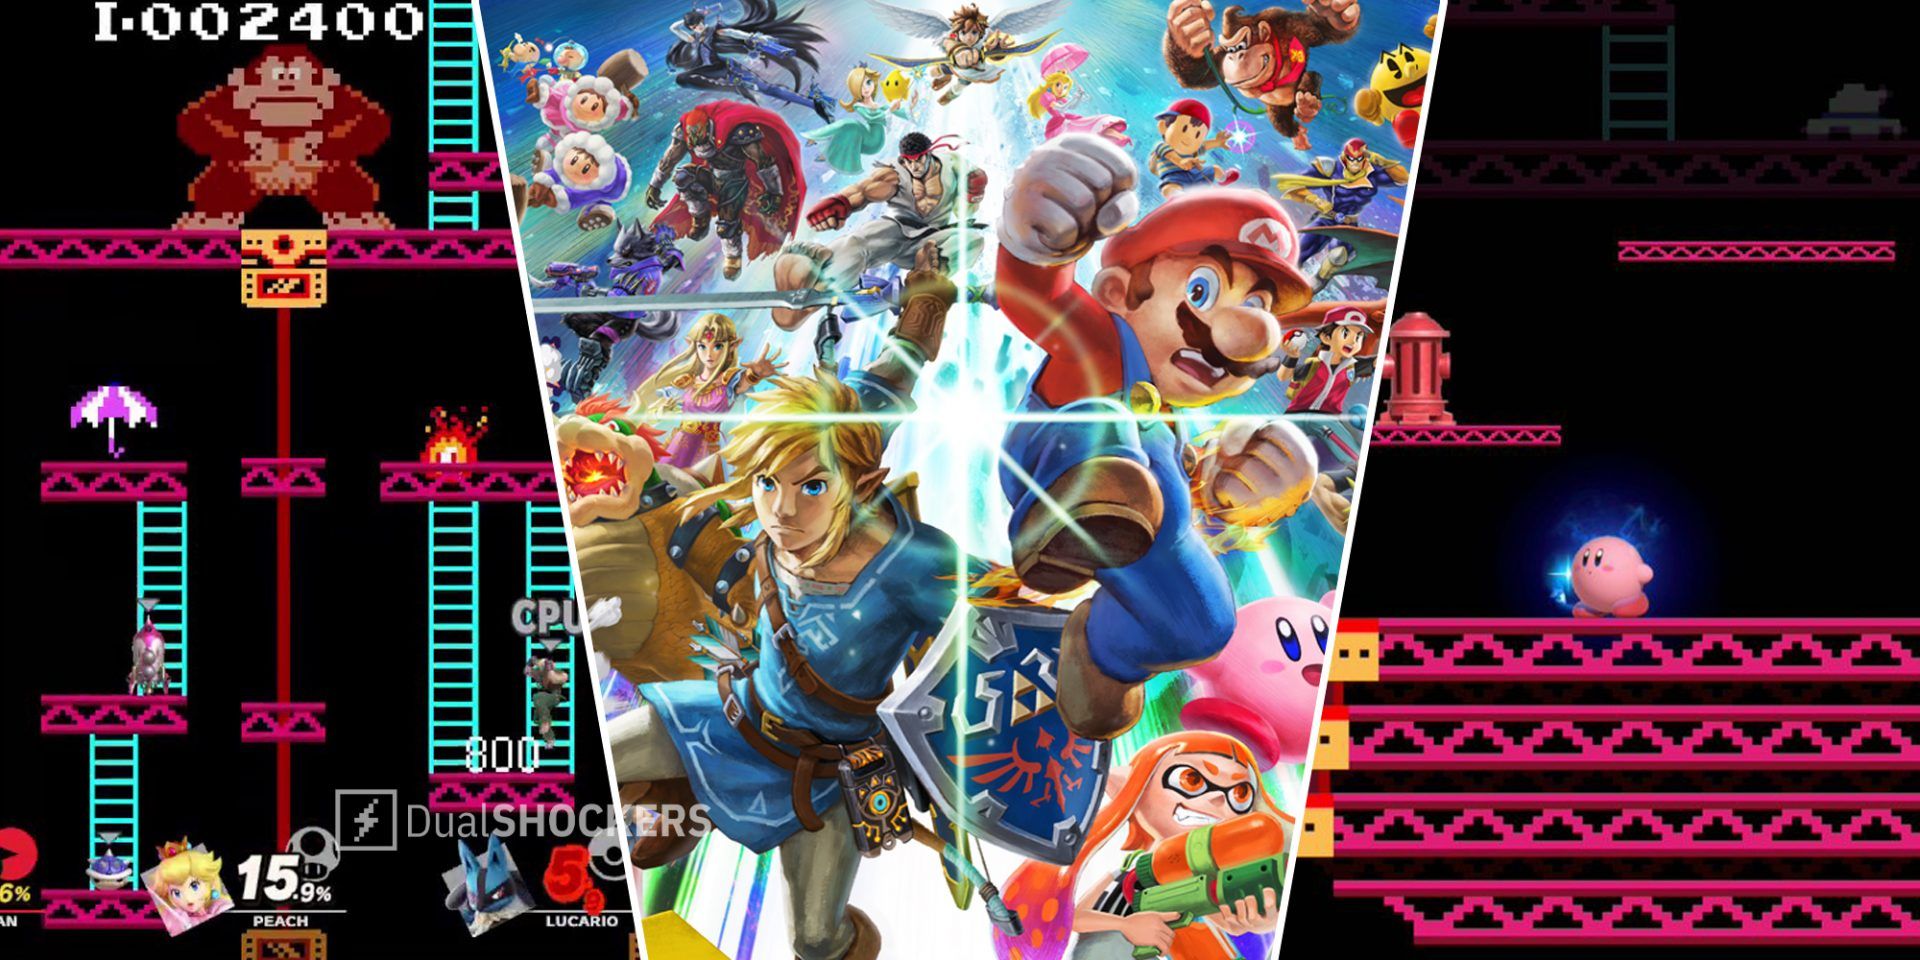 Super Smash Bros Ultimate The 75m stage on left and right, Super Smash Bros Ultimate promo image in middle